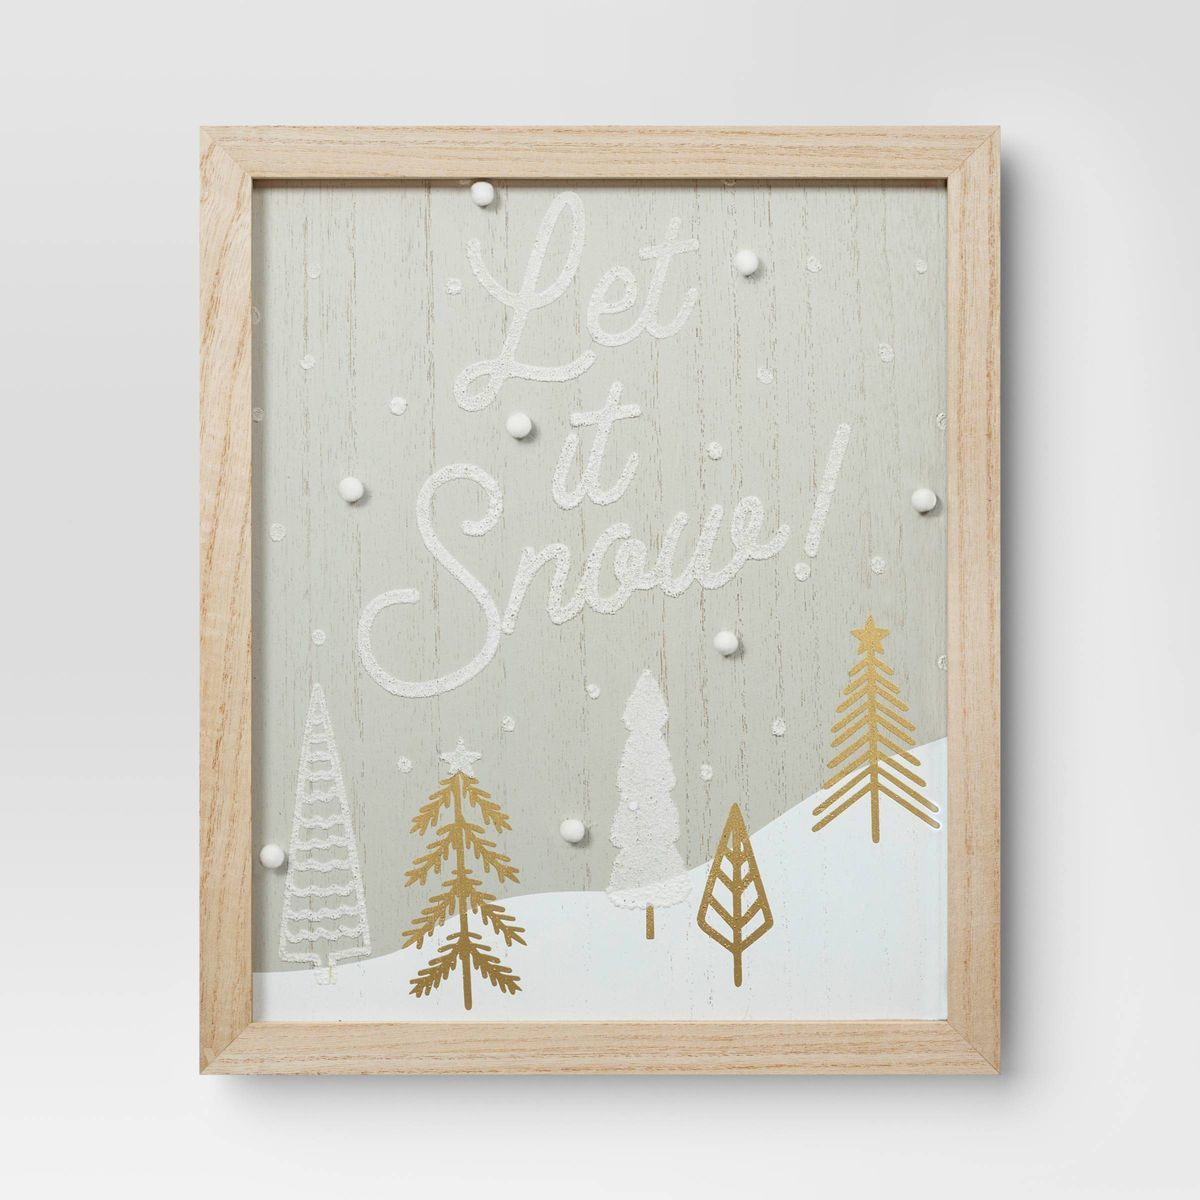 10"x10" Framed 'Let it Snow' Hanging Christmas Wall Décor Gray/White - Wondershop™ | Target